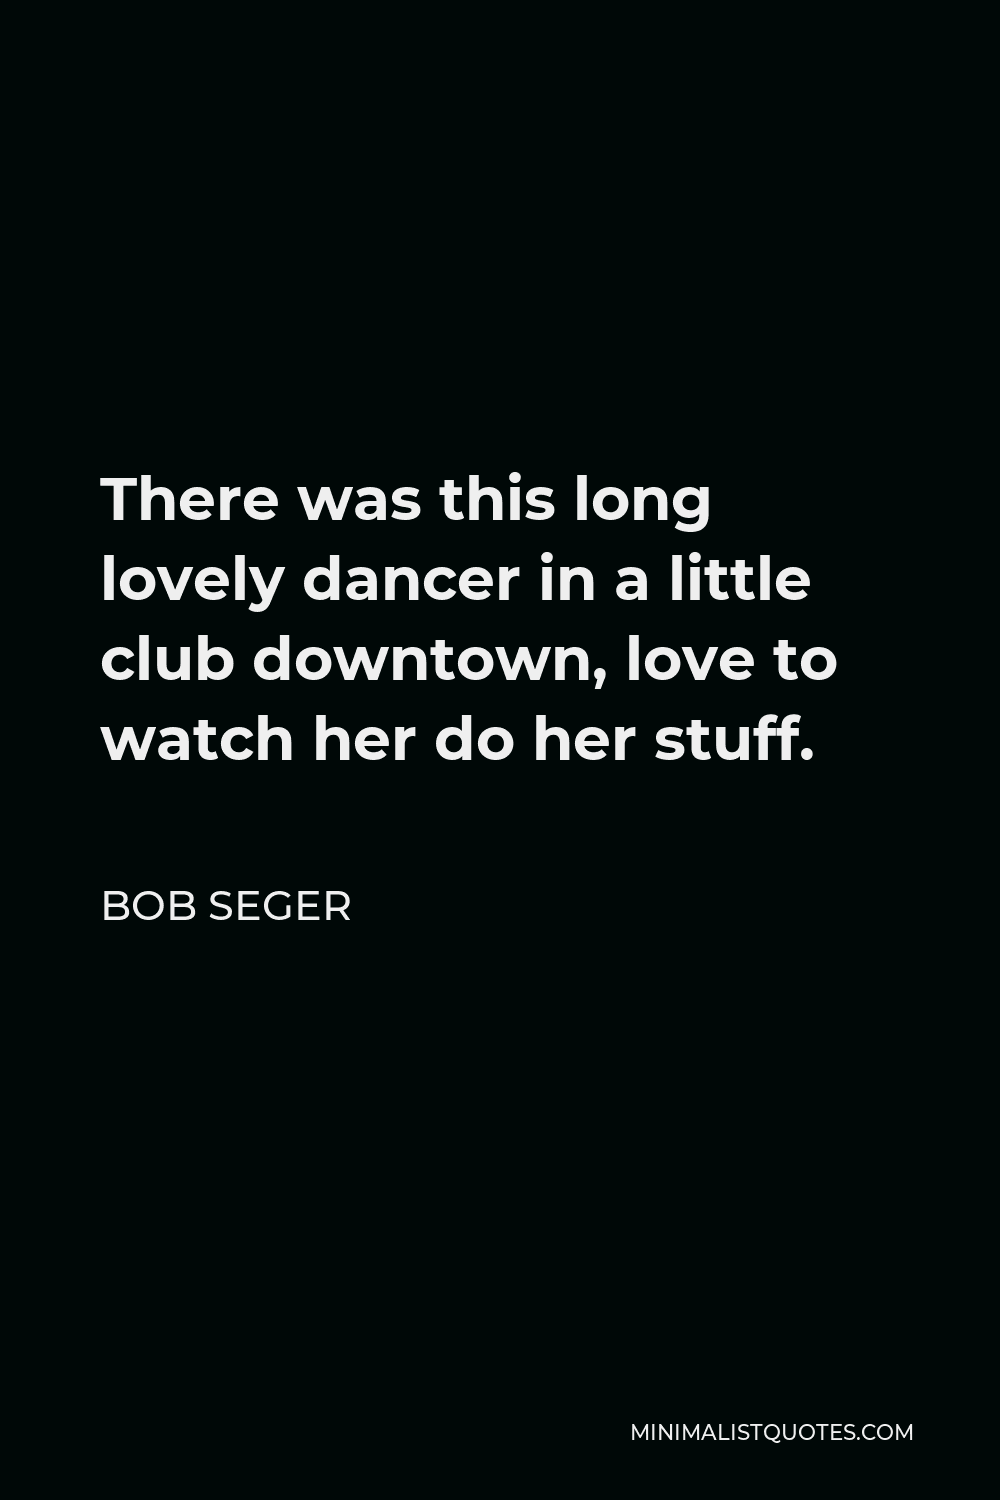 Bob Seger Quote - There was this long lovely dancer in a little club downtown, love to watch her do her stuff.